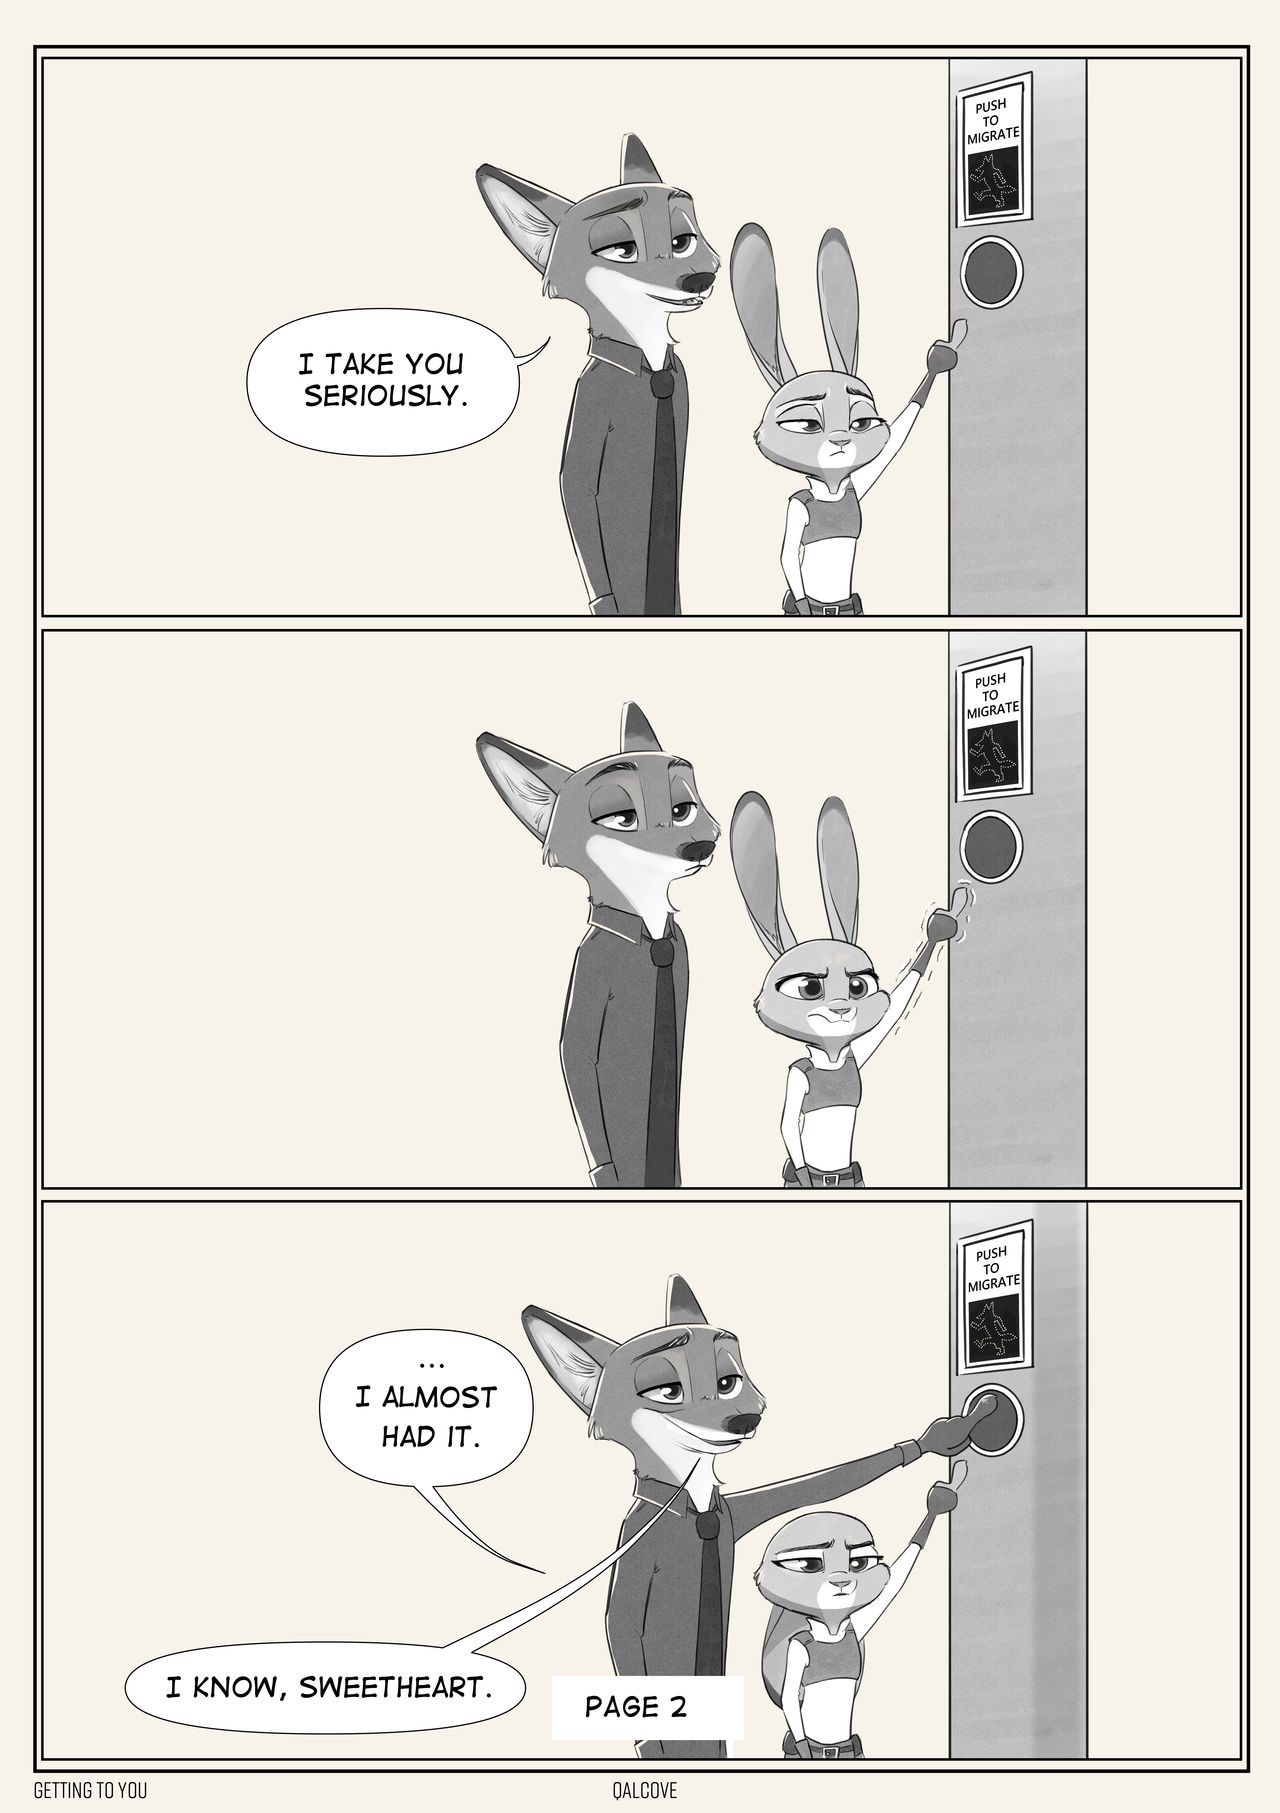 [Qalcove] Getting To You (Zootopia) Ongoing 2